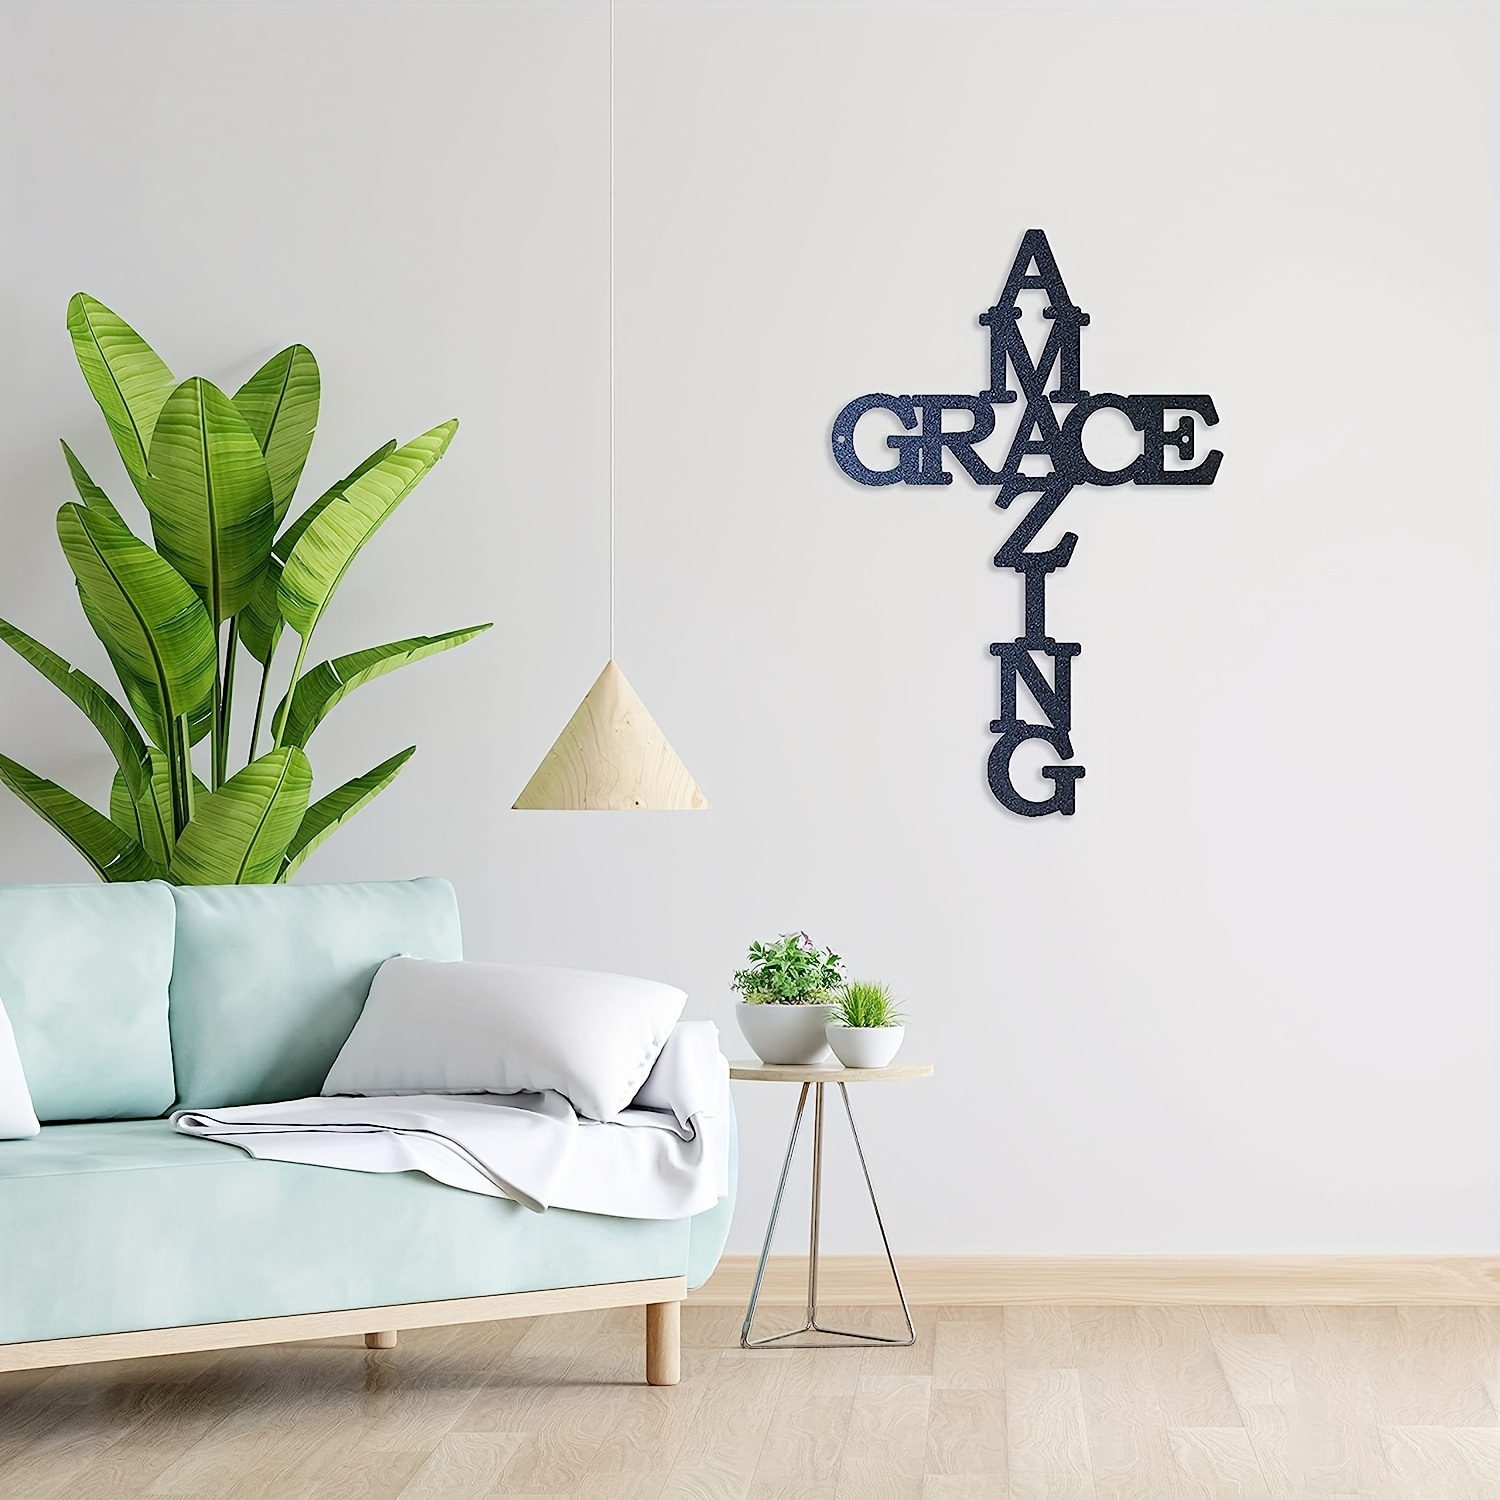 Decorative Faith Wall Metal Spiritual Decorations for Home - Religious  Hanging Wall Decor, for Home Bedroom Office Background